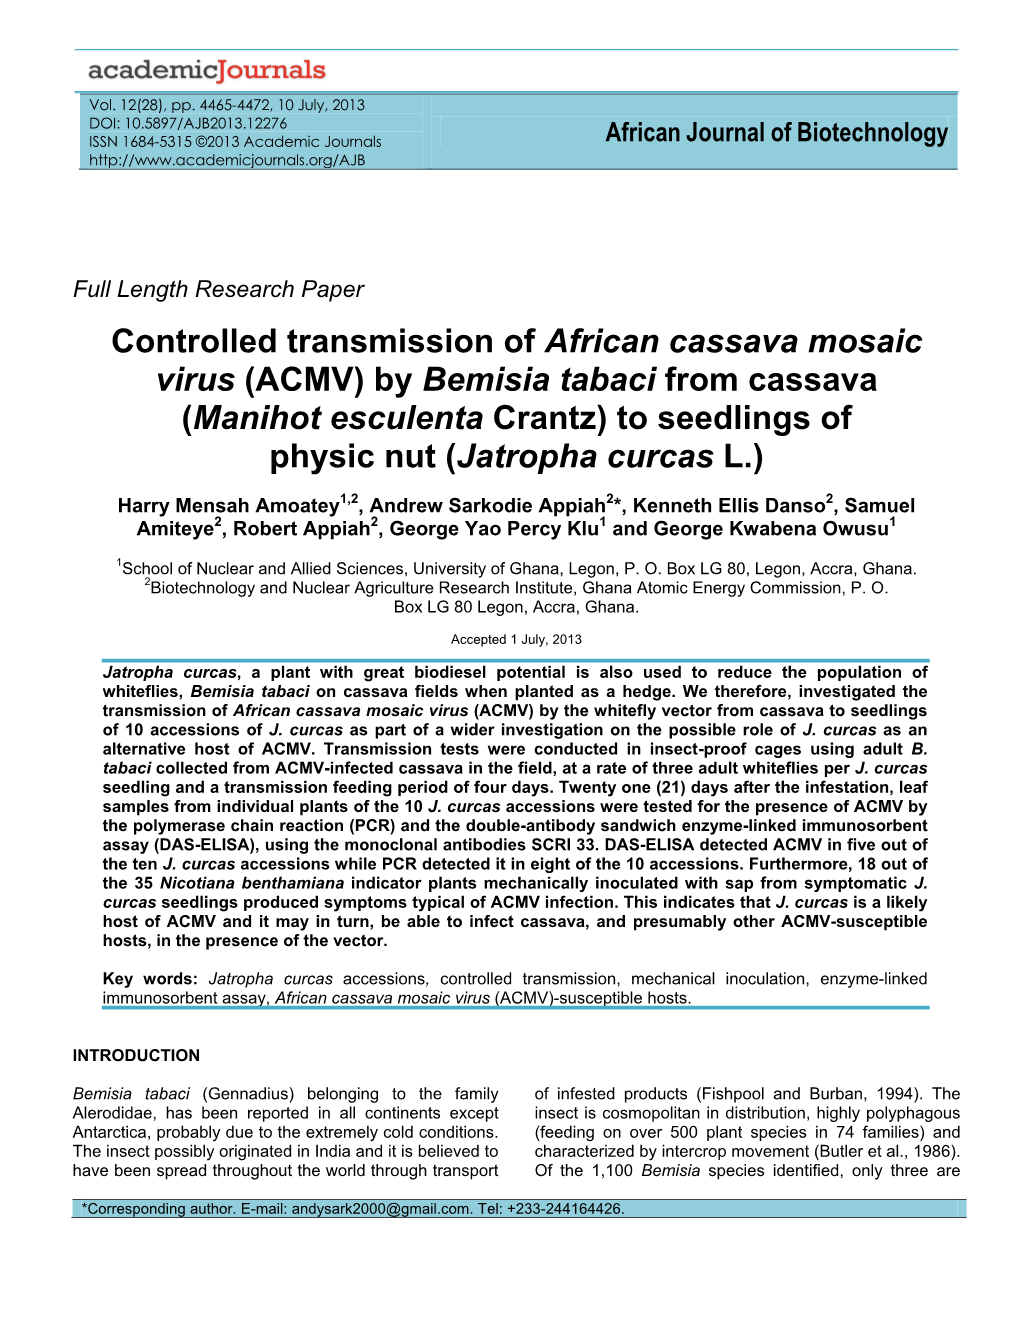 Controlled Transmission of African Cassava Mosaic Virus (ACMV) By